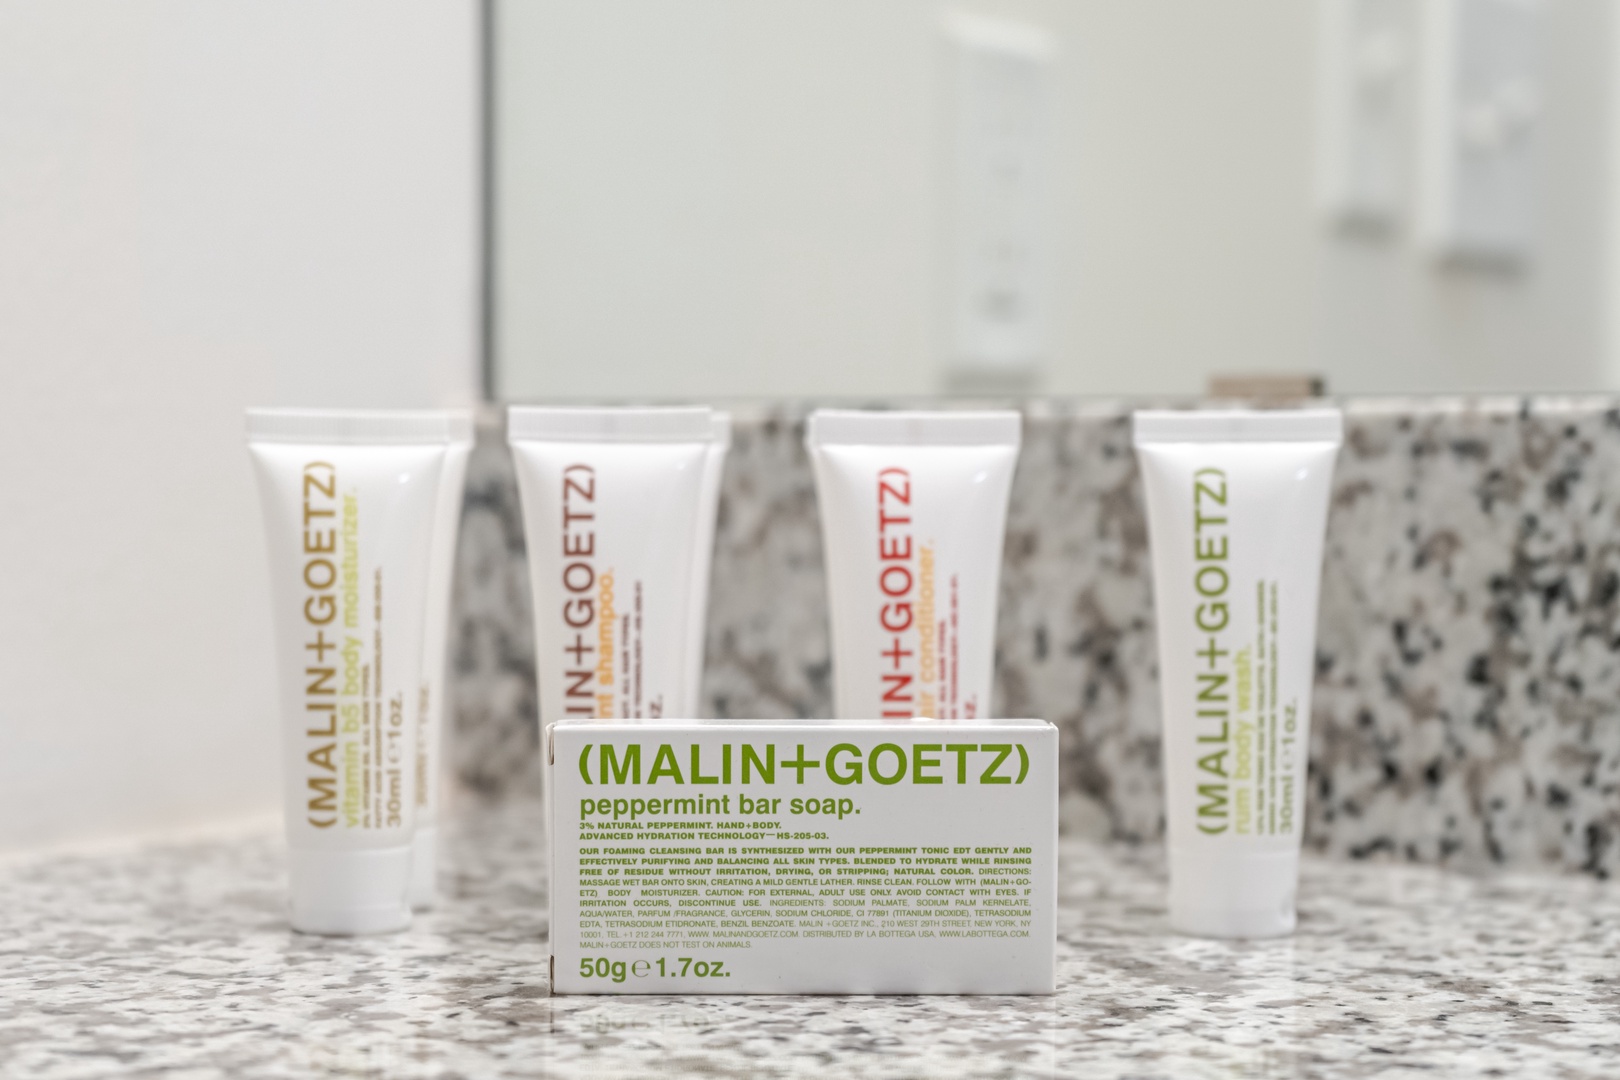 Treat yourself to complimentary toiletries by Malin + Goetz in the bathroom.